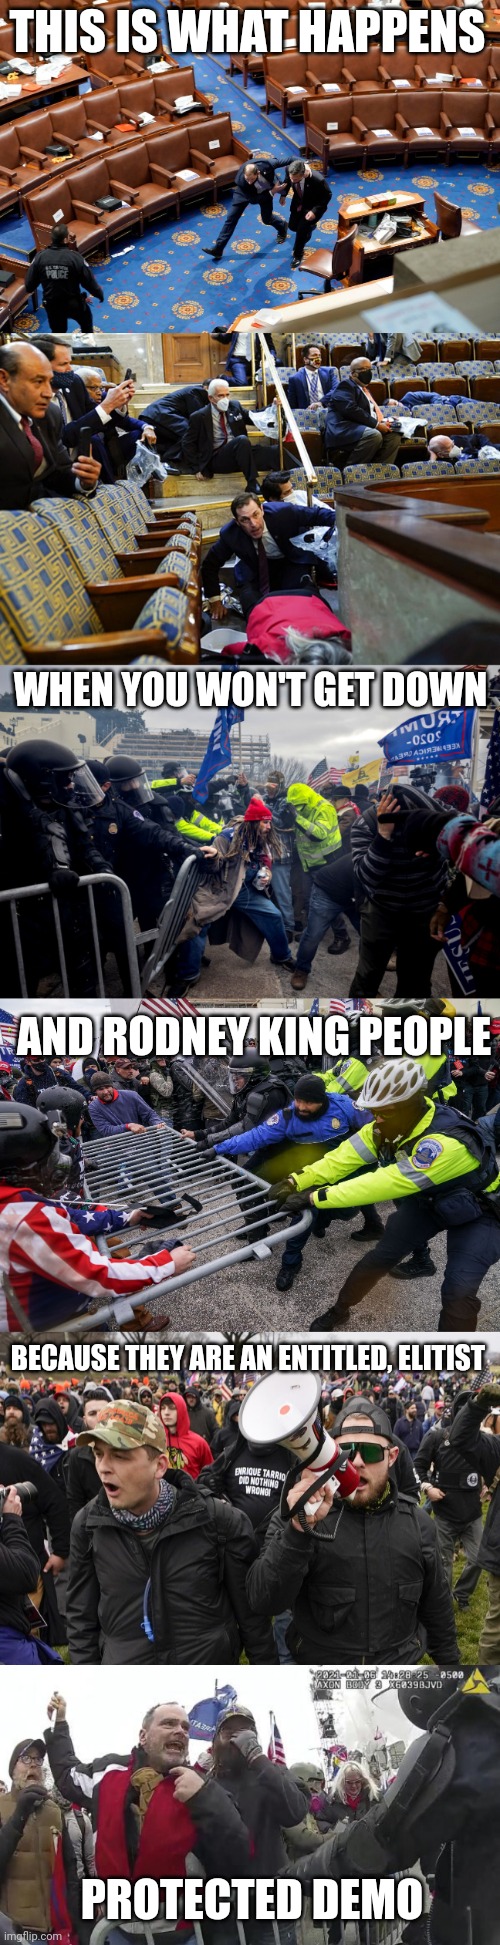 THIS IS WHAT HAPPENS; WHEN YOU WON'T GET DOWN; AND RODNEY KING PEOPLE; BECAUSE THEY ARE AN ENTITLED, ELITIST; PROTECTED DEMO | image tagged in facts,the truth | made w/ Imgflip meme maker